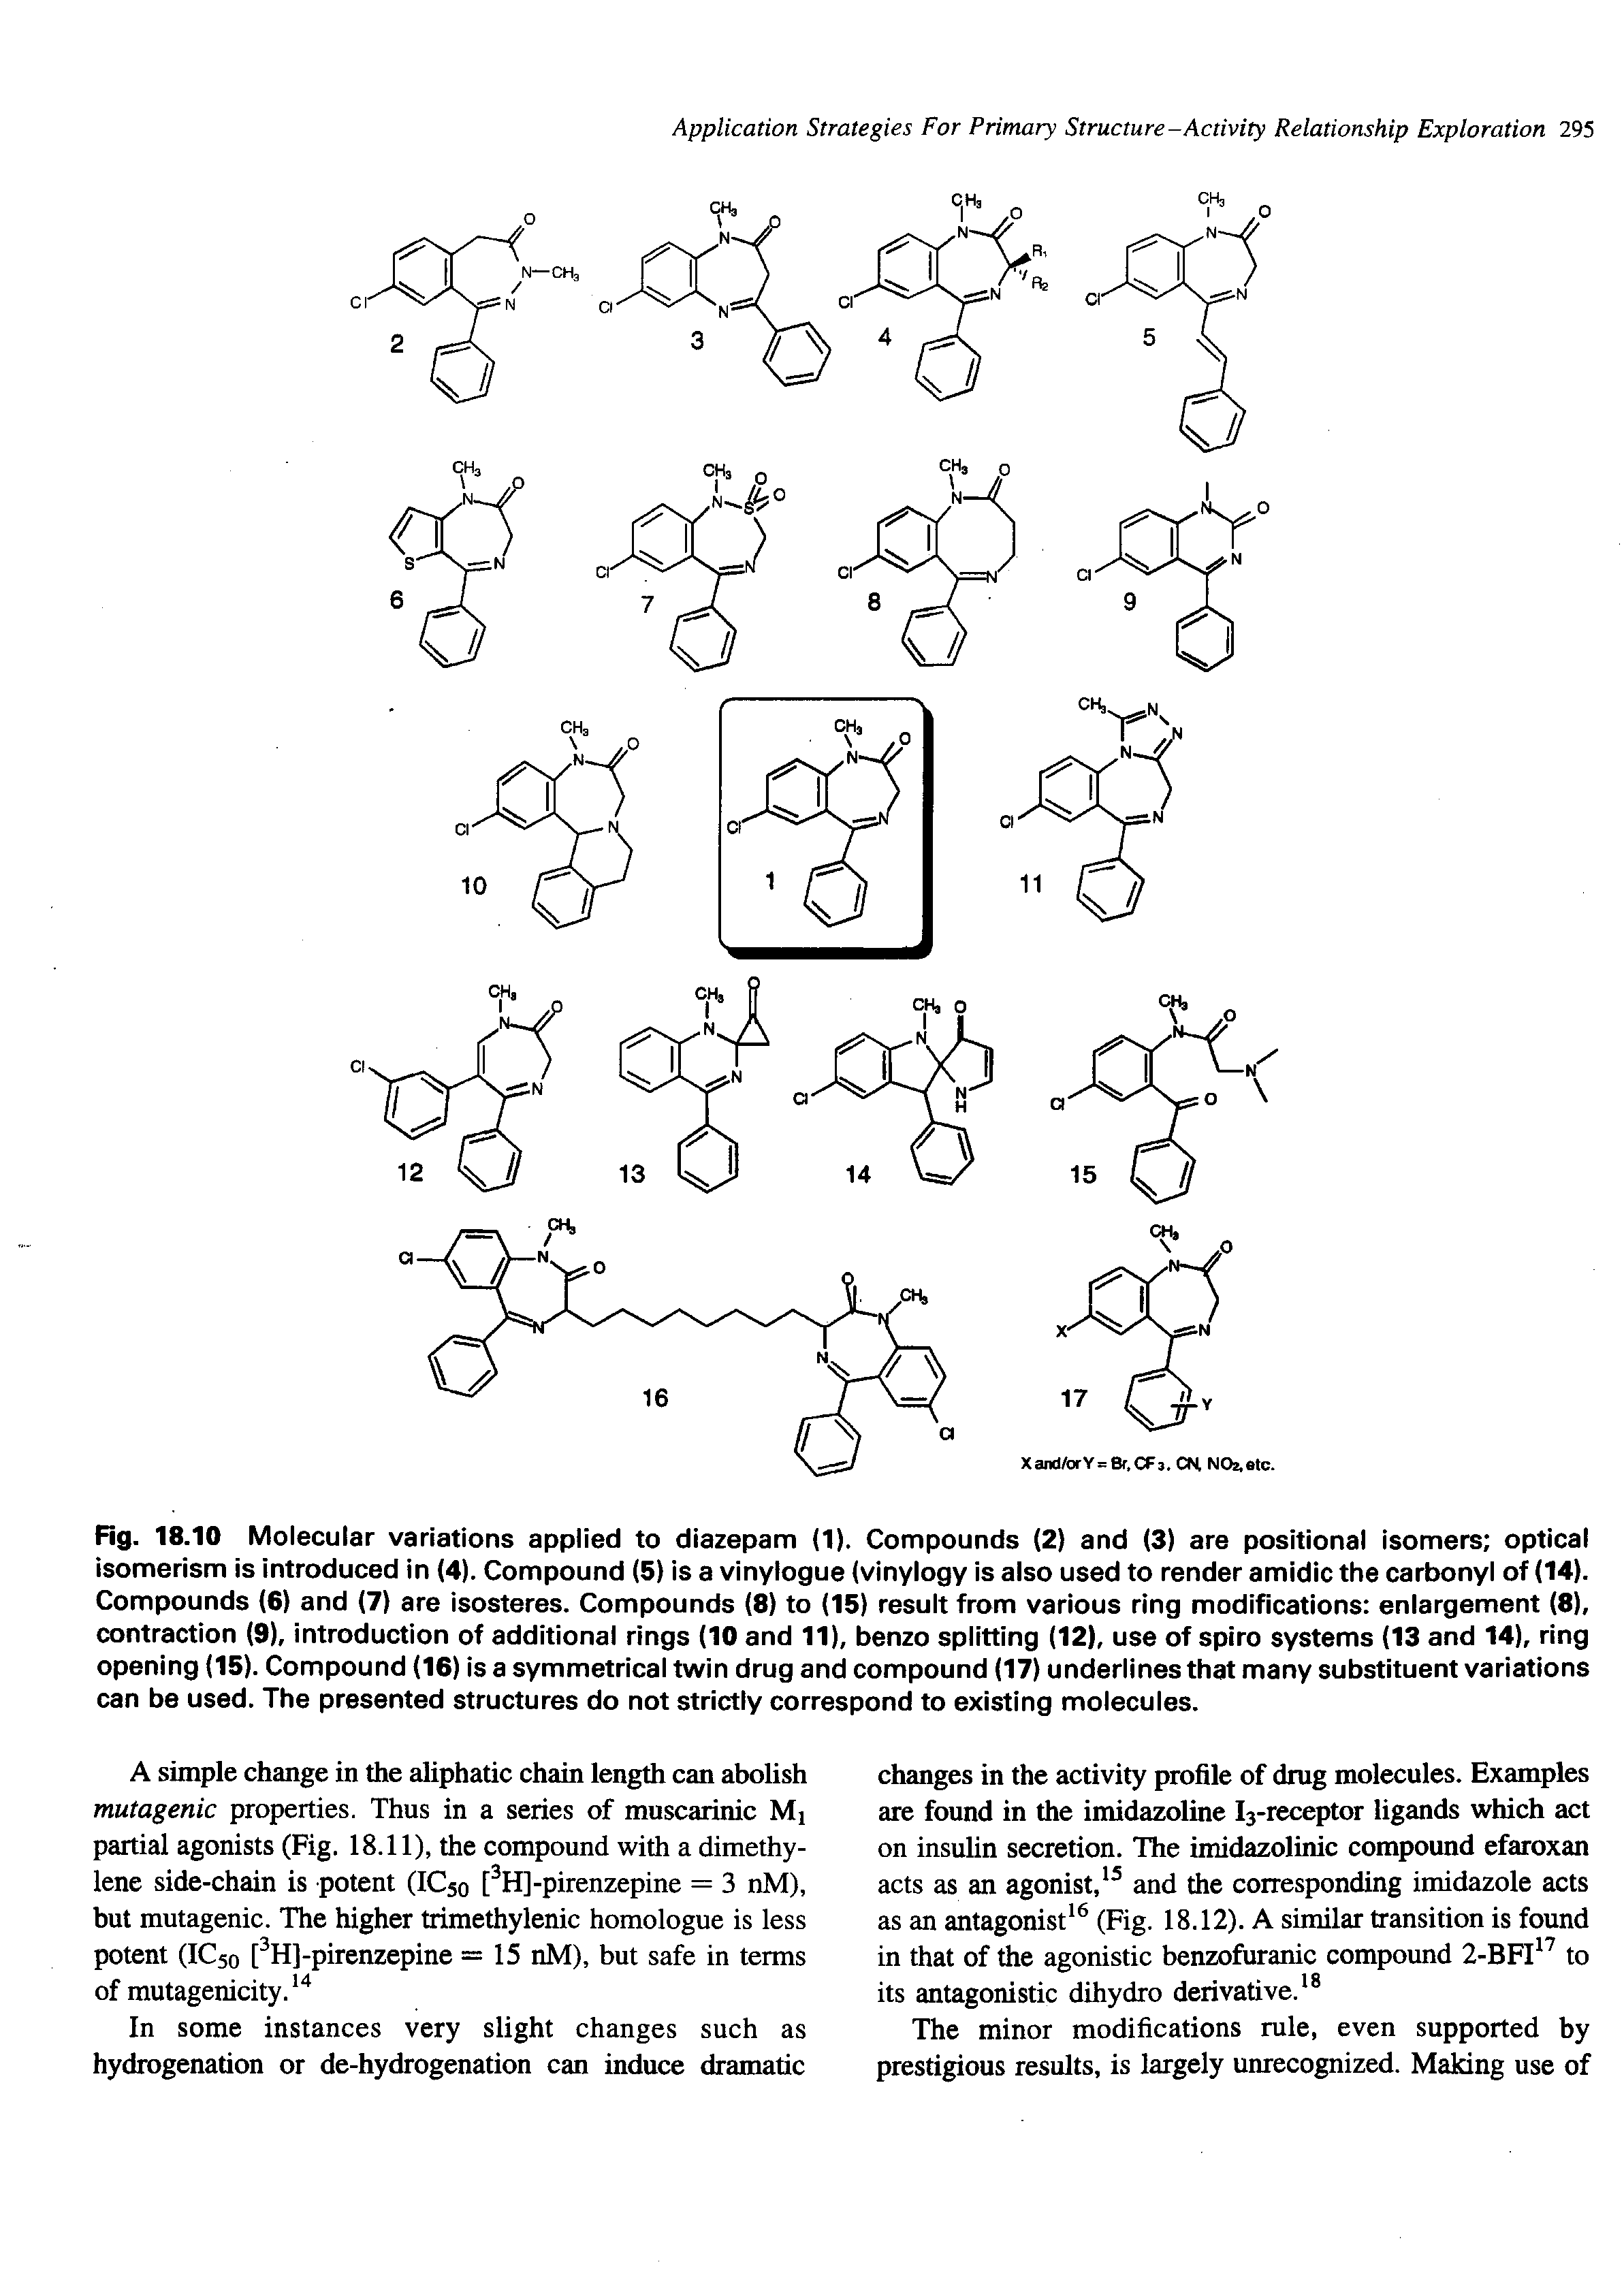 Fig. 18.10 Molecular variations applied to diazepam (1). Compounds (2) and (3) are positional isomers optical isomerism is introduced in (4). Compound (5) is a vinylogue (vinylogy is also used to render amidic the carbonyl of (14). Compounds (6) and (7) are isosteres. Compounds (8) to (15) result from various ring modifications enlargement (8), contraction (9), introduction of additional rings (10 and 11), benzo splitting (12), use of spiro systems (13 and 14), ring opening (15). Compound (16) is a symmetrical twin drug and compound (17) underlines that many substituent variations can be used. The presented structures do not strictly correspond to existing molecules.